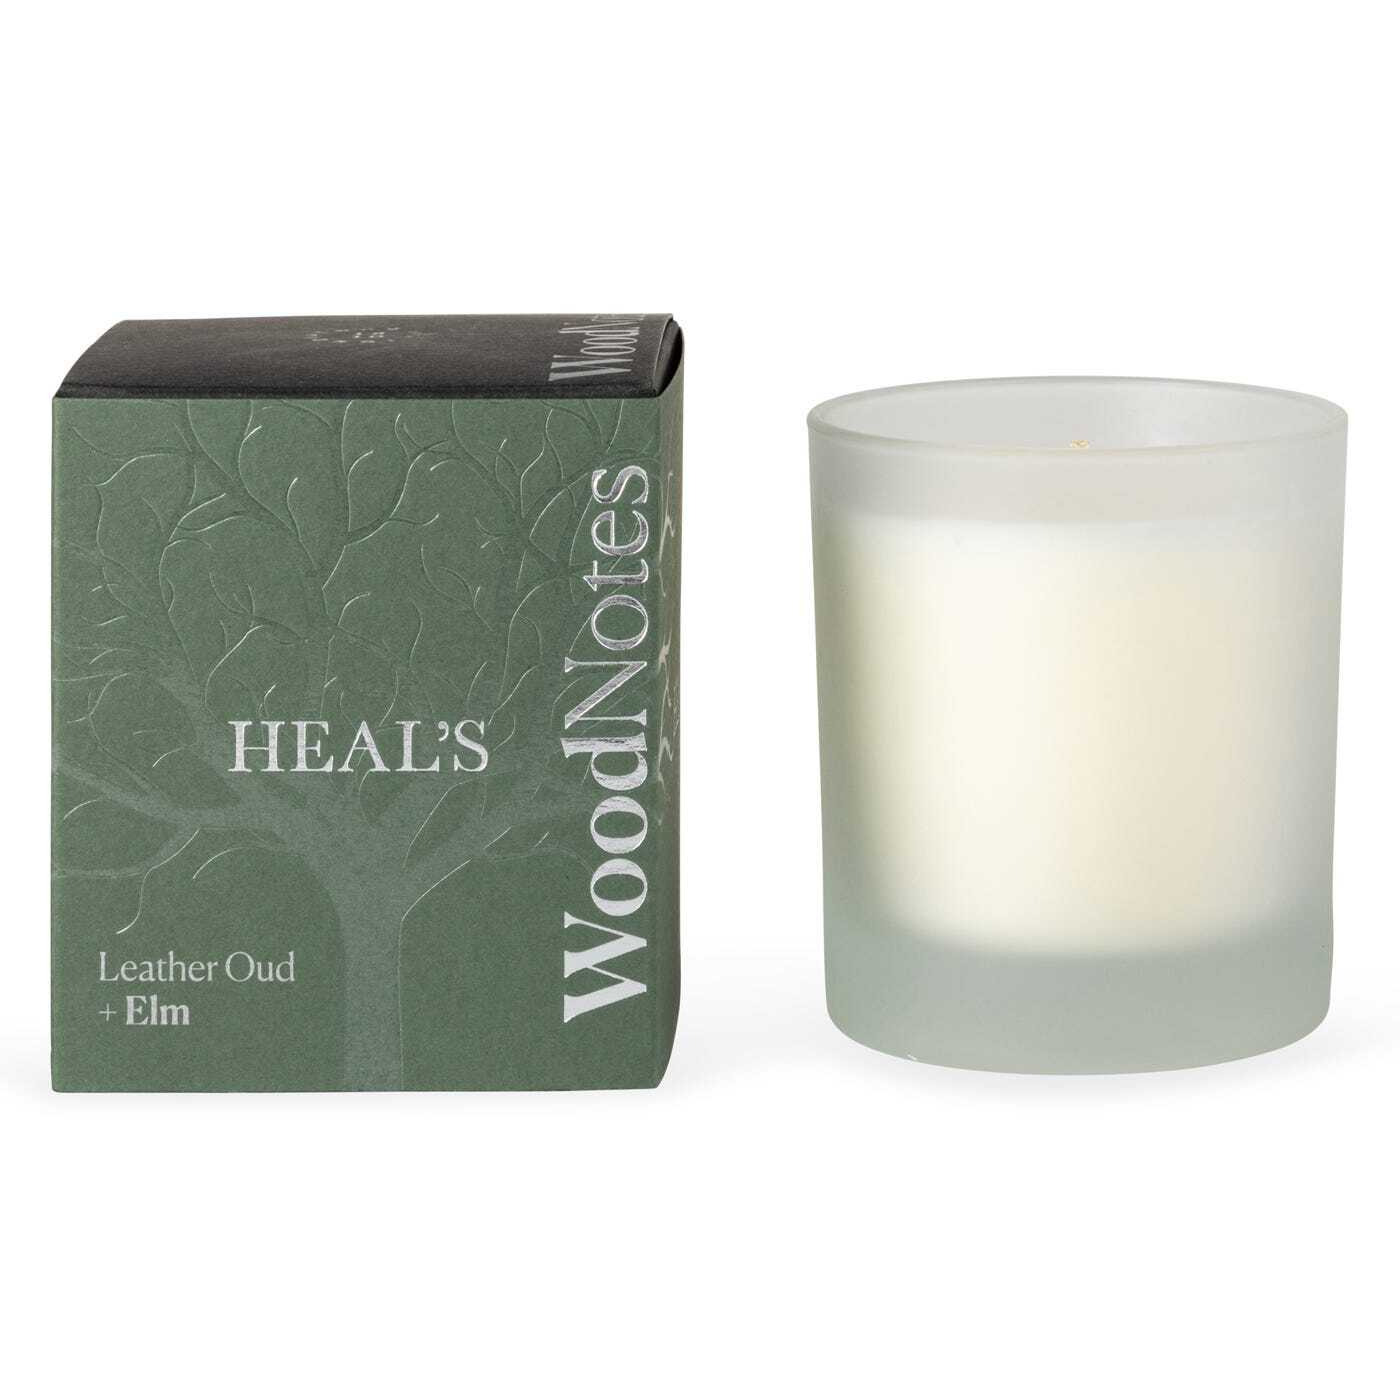 Heal's Leather Oud and Elm Scented Candle